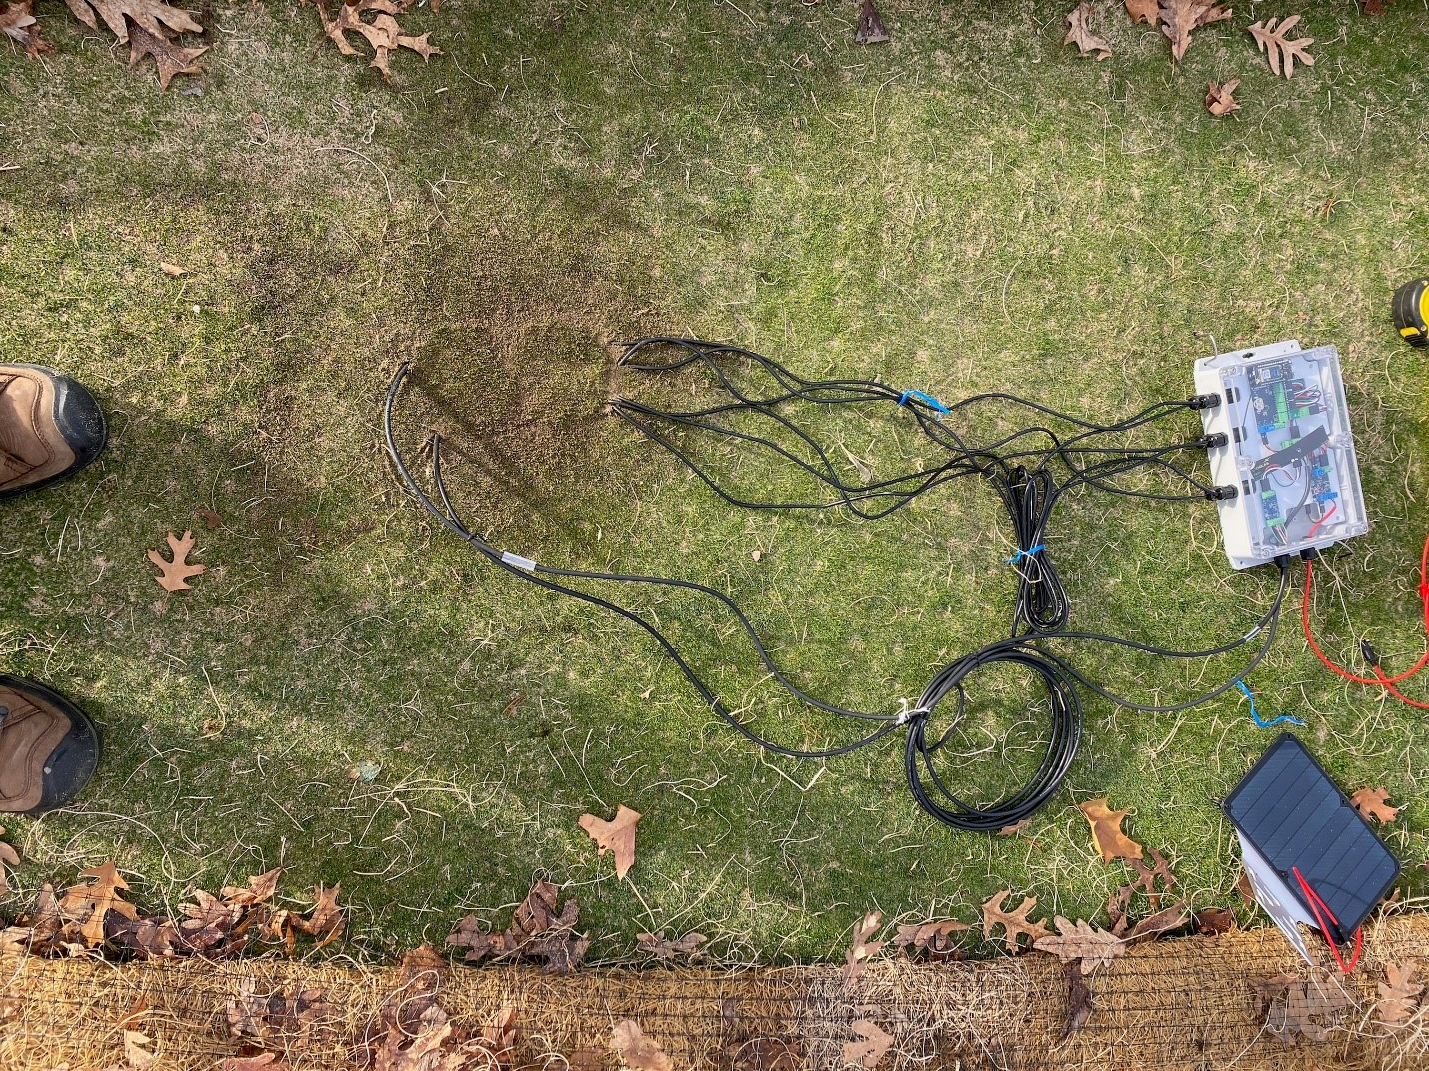 Wires buried beneath turf connected to sensor equipment